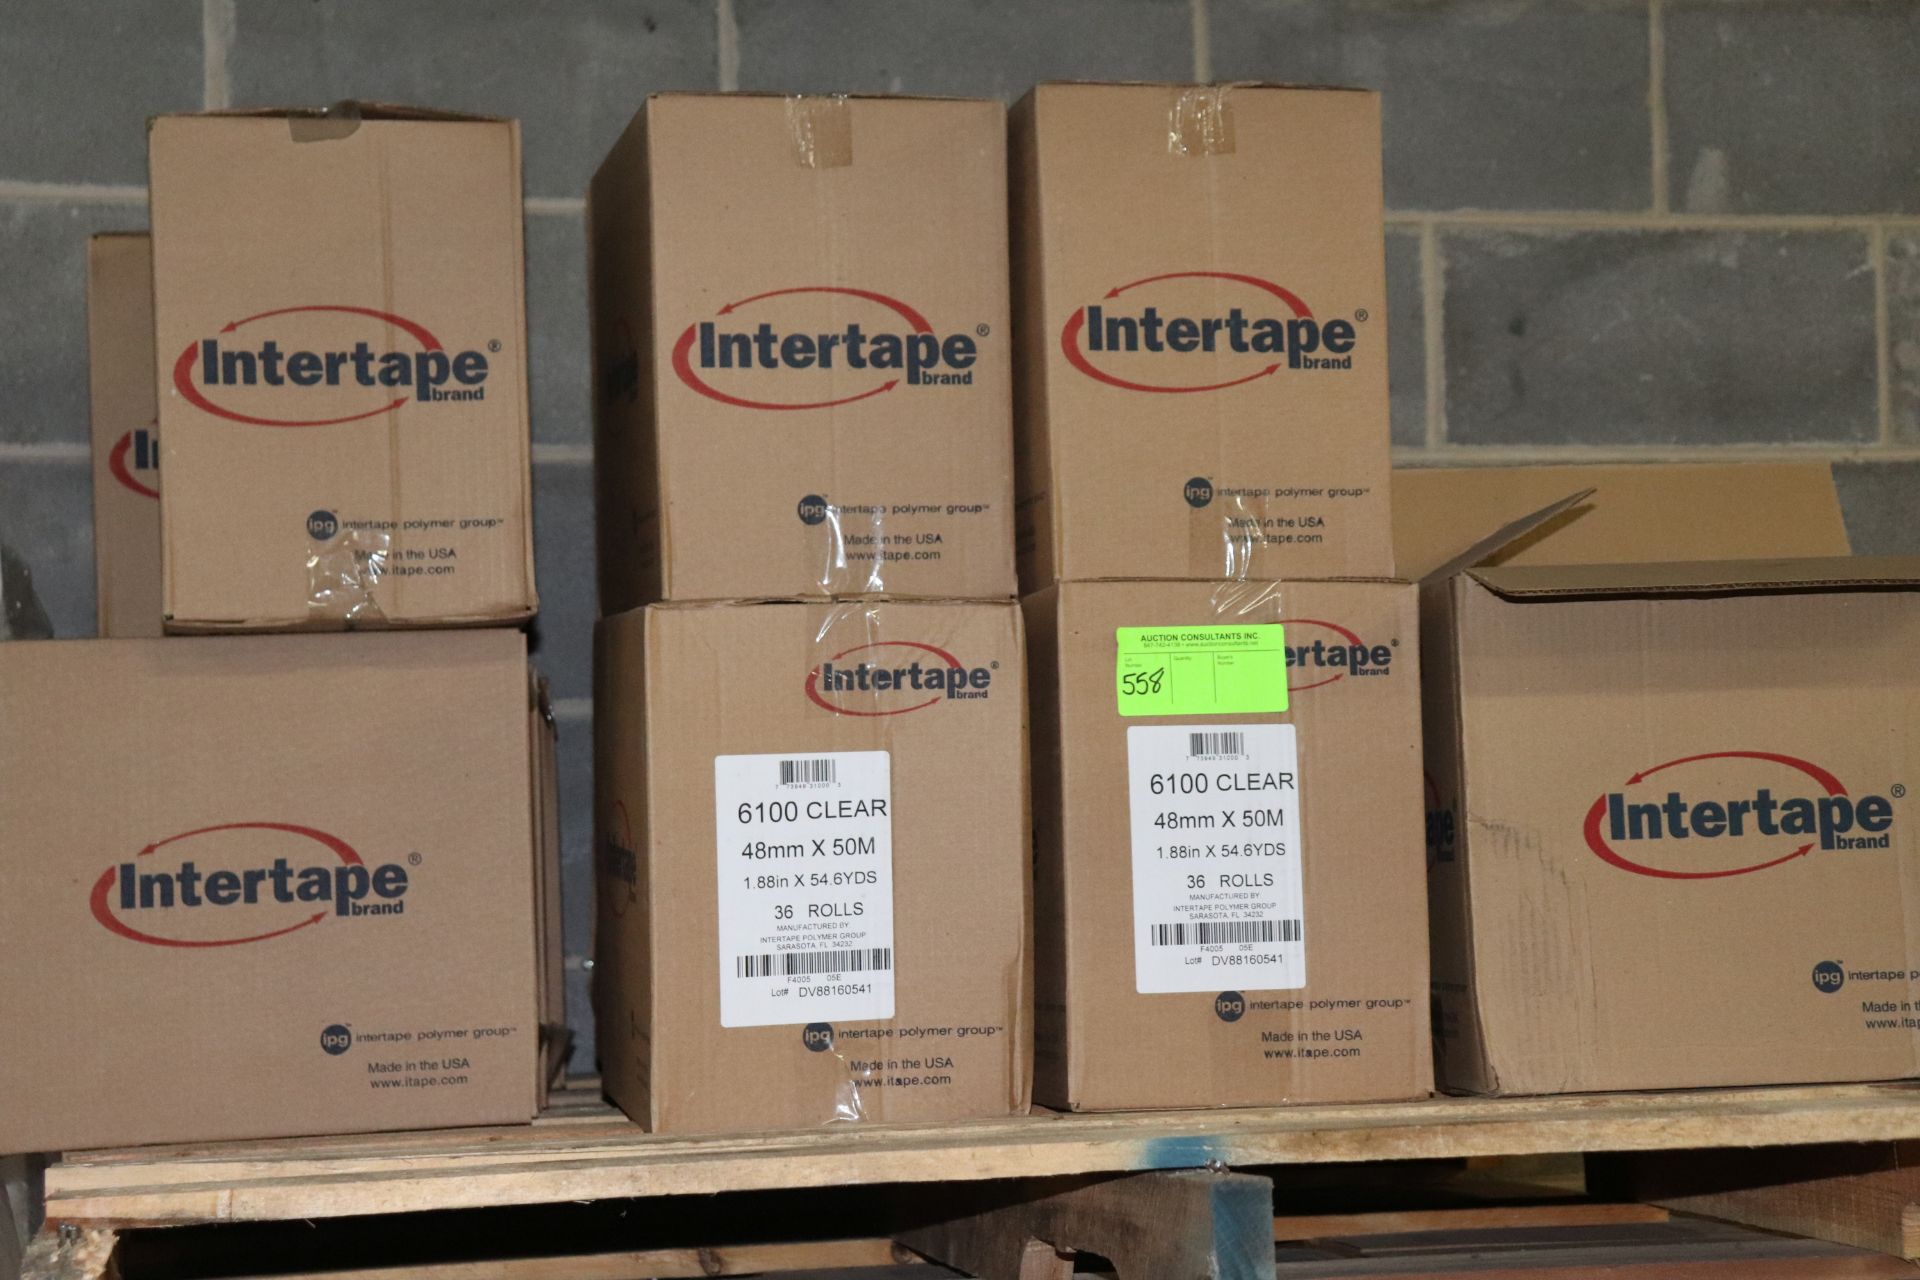 Approximately 16 boxes of Intertape brand clear tape, 48mm x 50m, 36 rolls per box